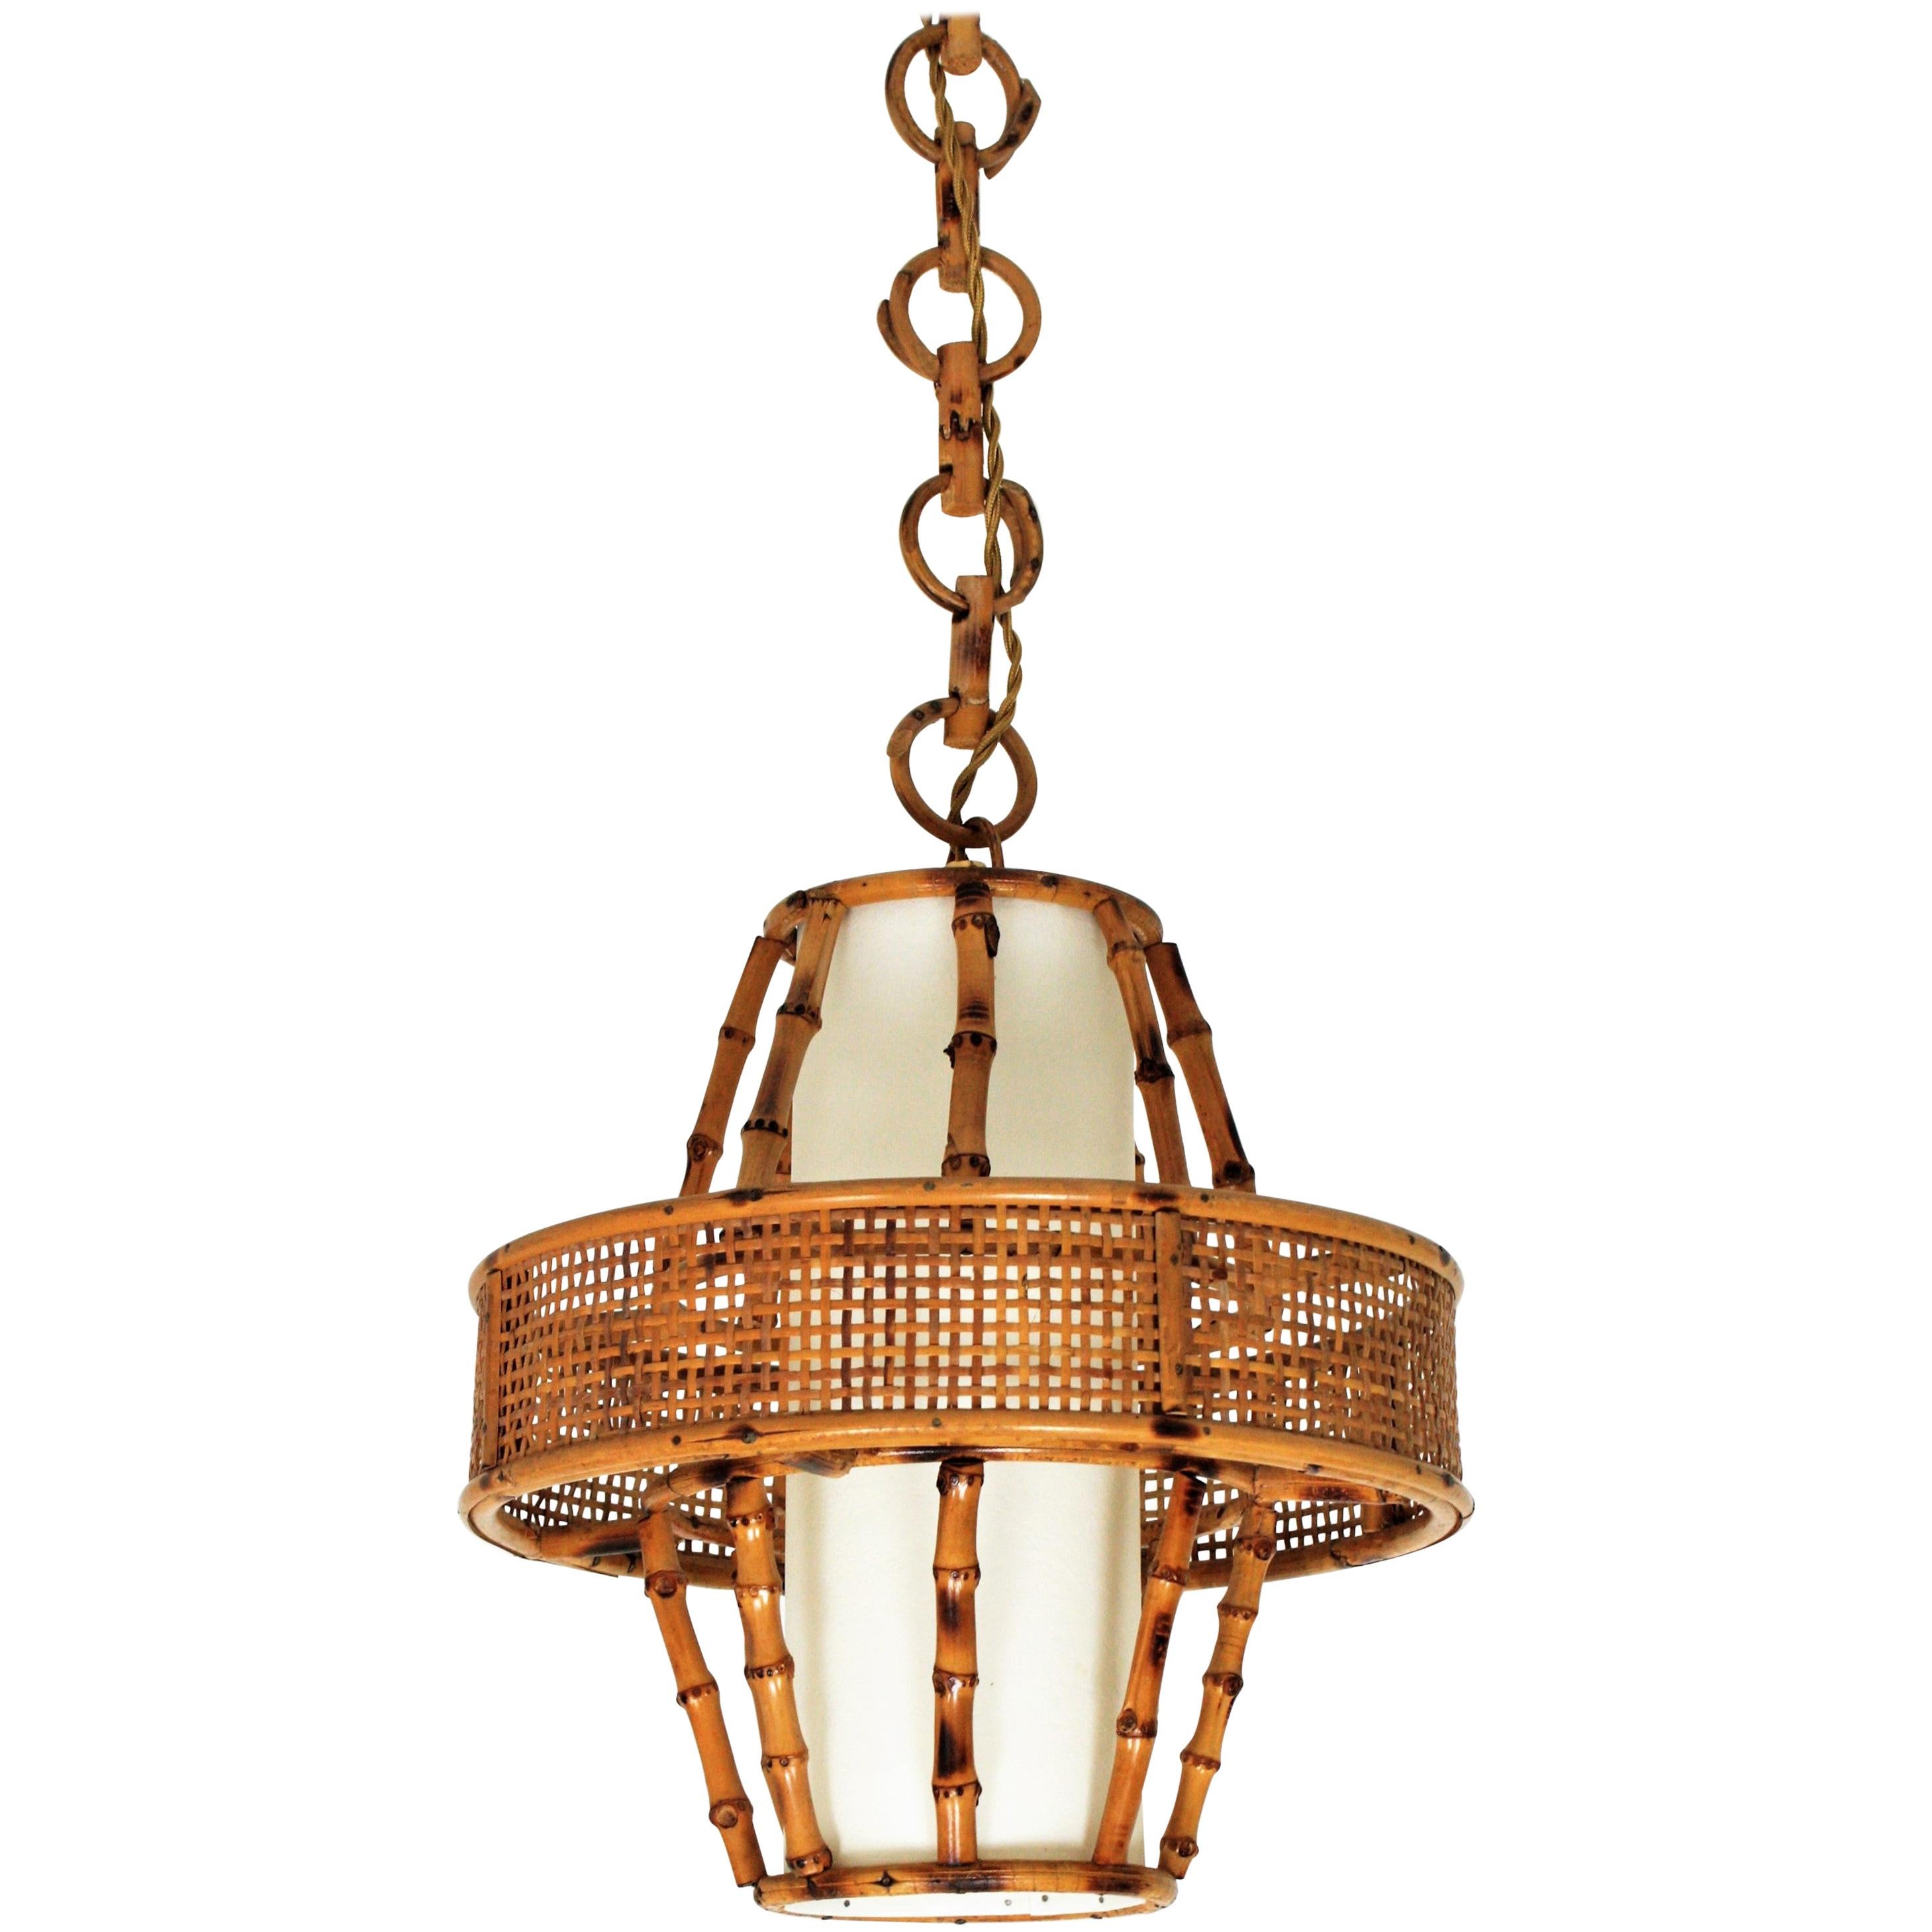 Spanish Mid-Century Modern bamboo and rattan hanging pendant lamp/ lantern with woven wicker accents and interior paper lampshade.
Manufactured at the Mid-Century Modern period with tiki or oriental accents, Spain, 1950s.
This sculptural lamp